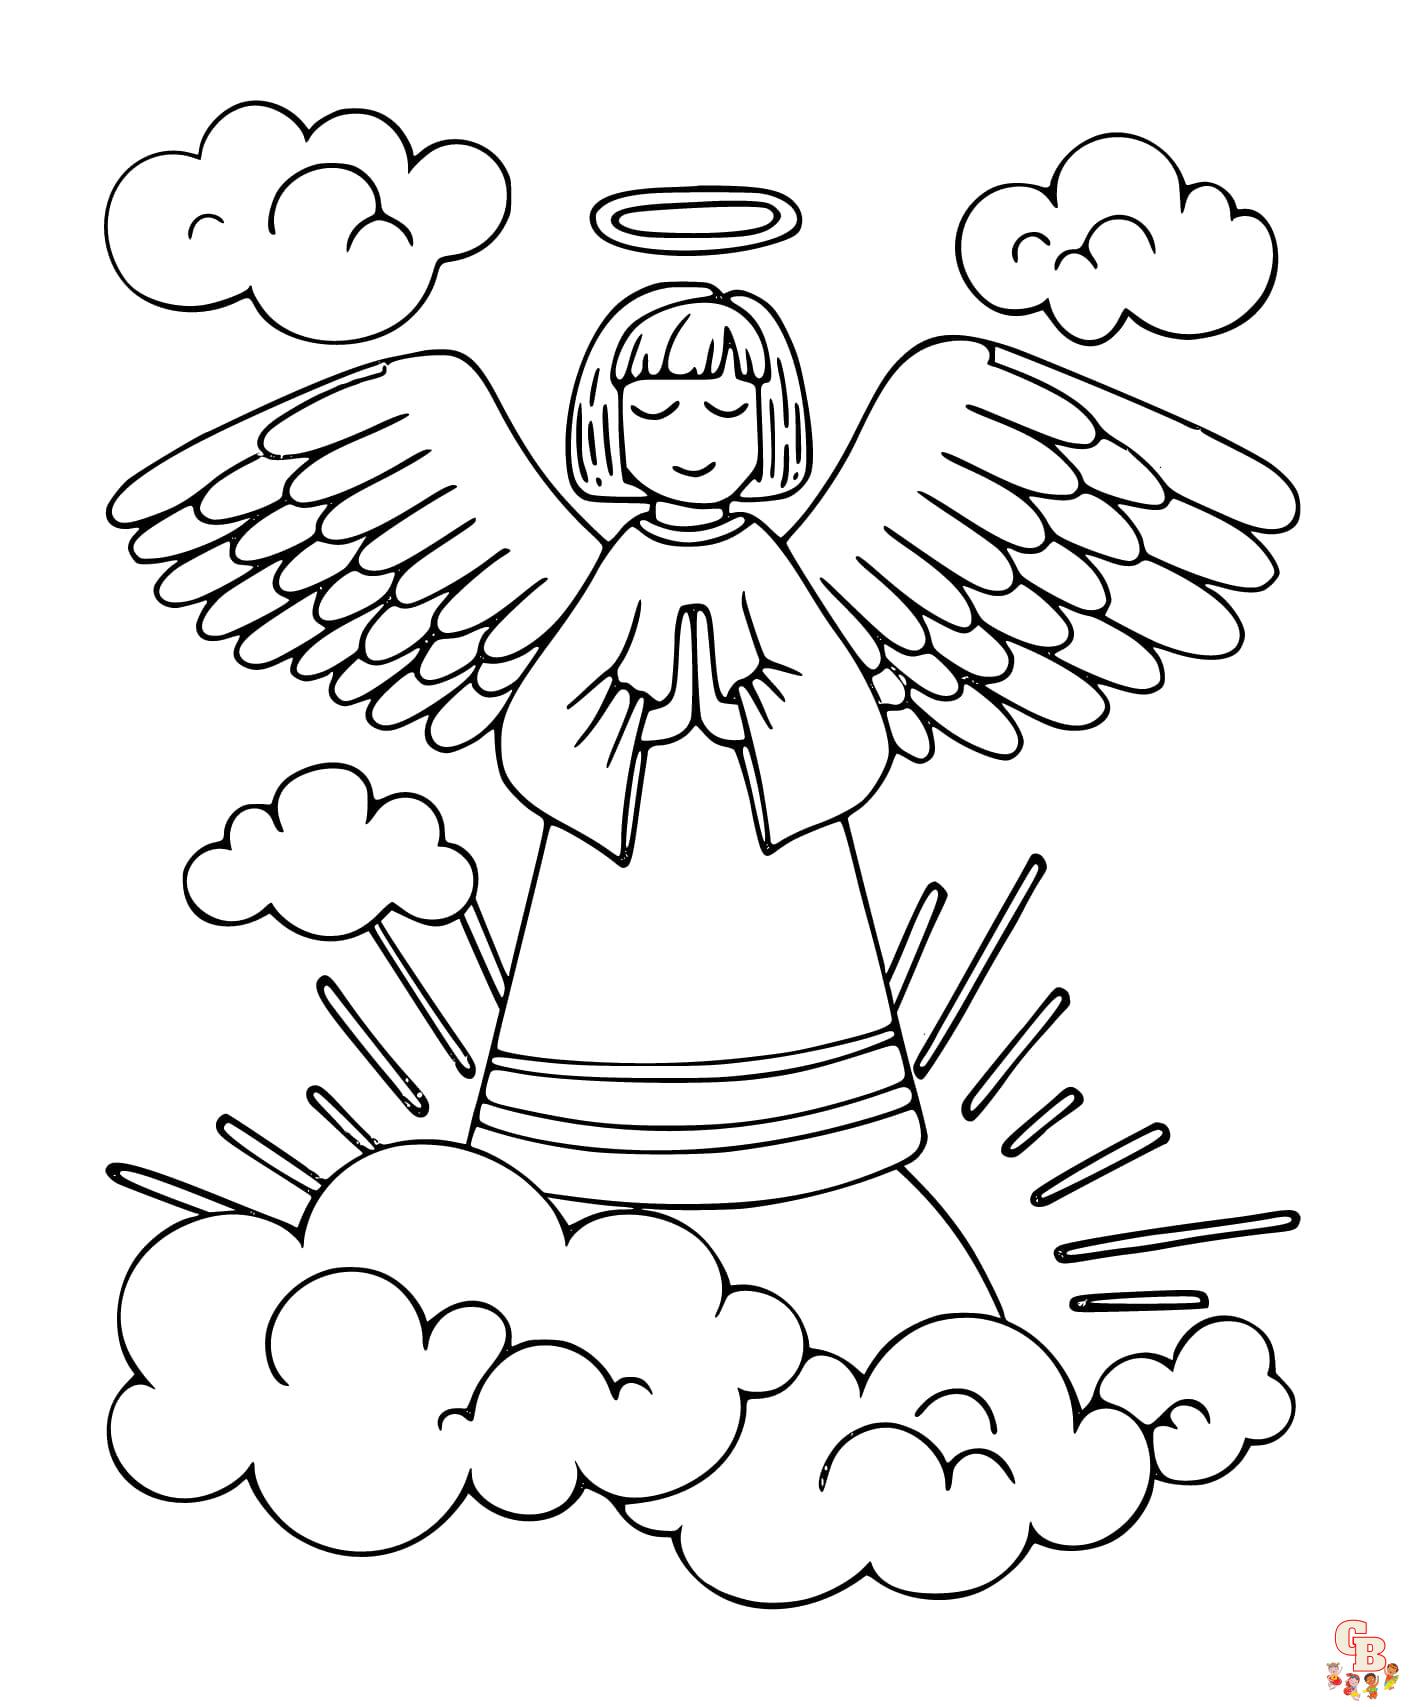 Free Heaven coloring pages for kids